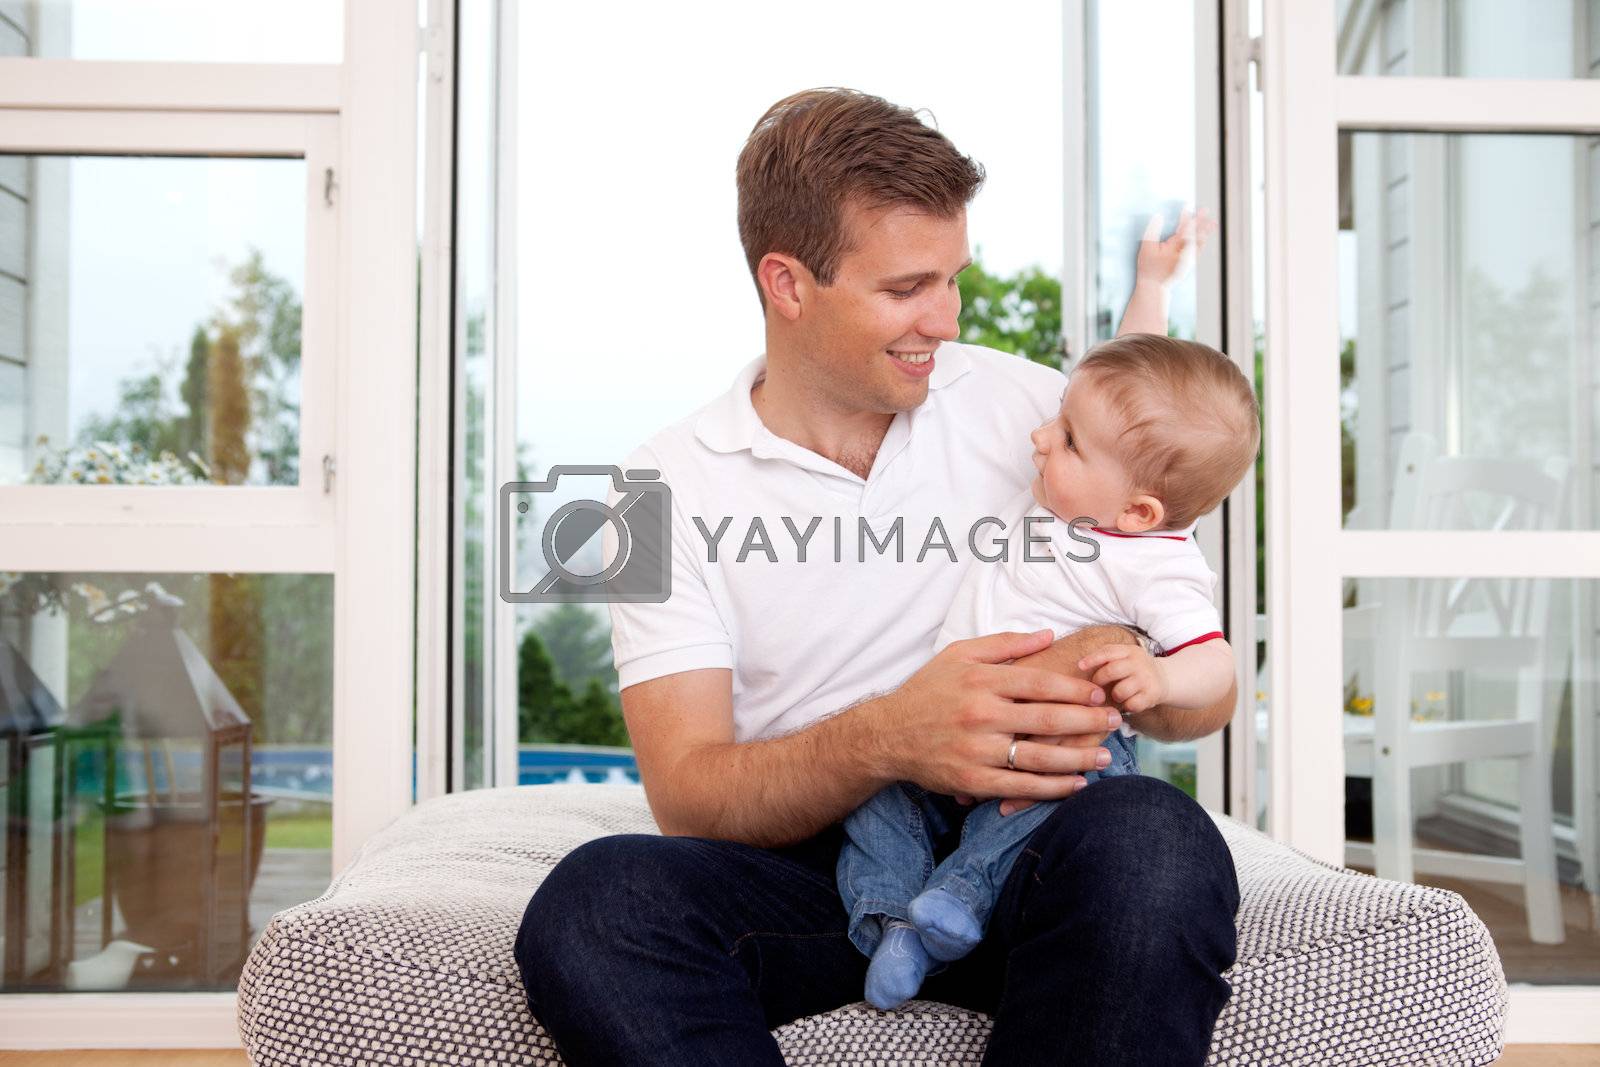 Royalty free image of Father and Son by leaf